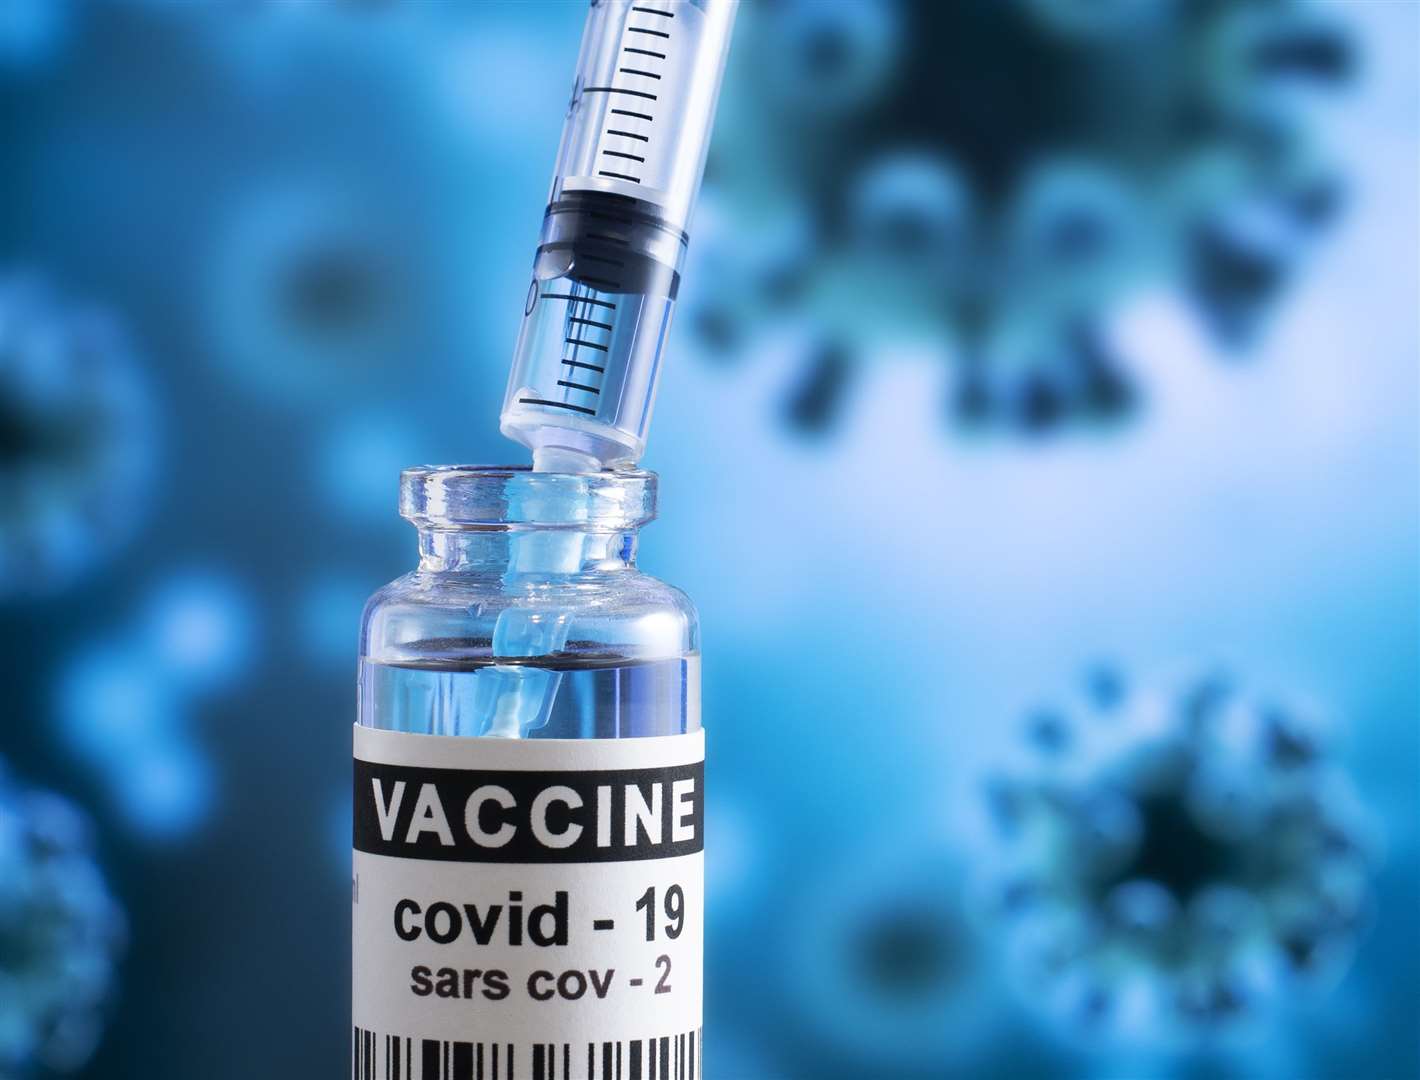 A large-scale vaccination site is due to open in the county next week